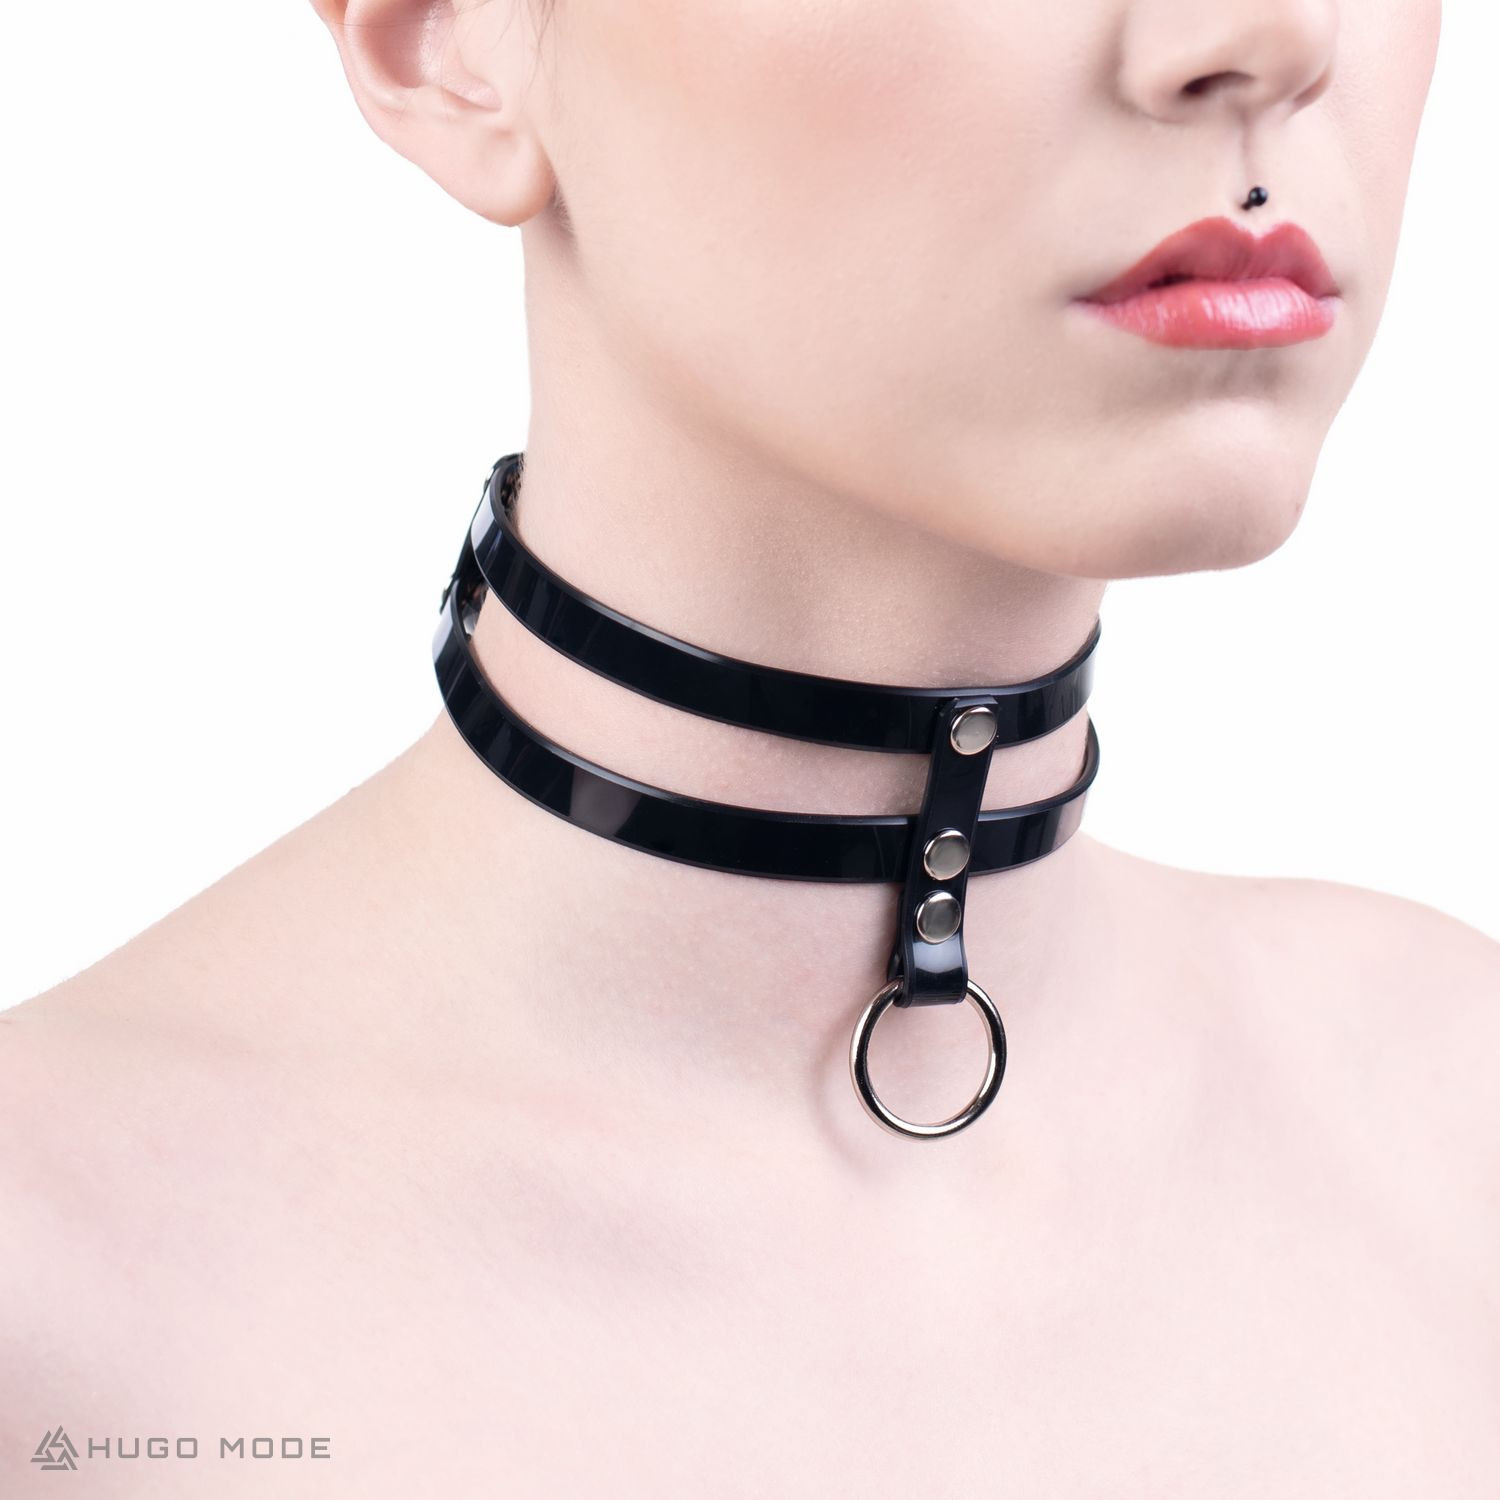 A choker necklace from thin PVC stripes.